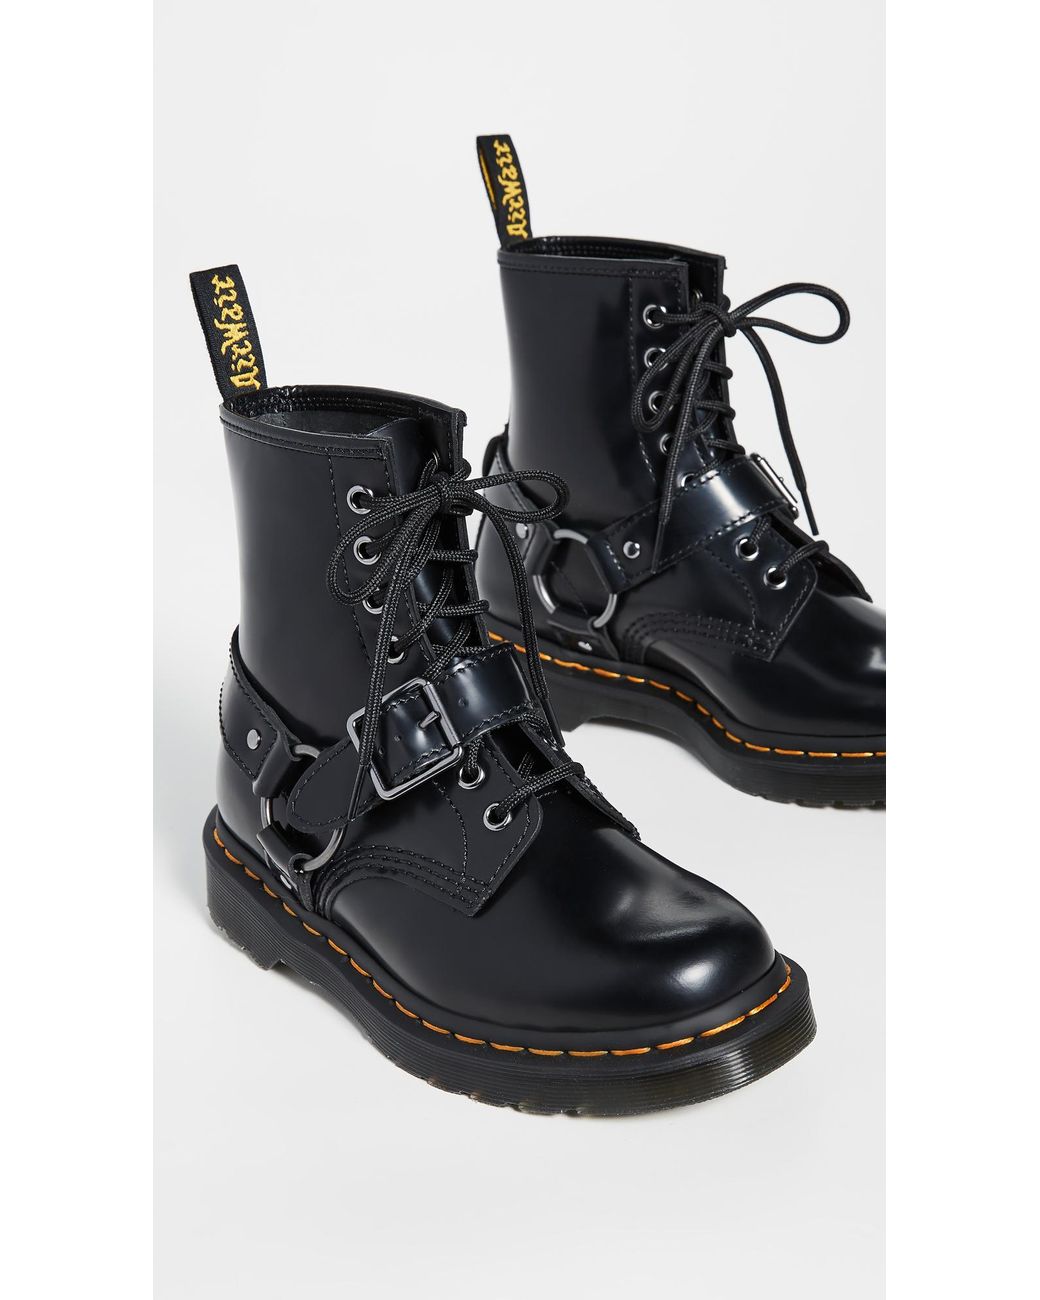 Dr. Martens 1460 Harness Boots in Black | Lyst